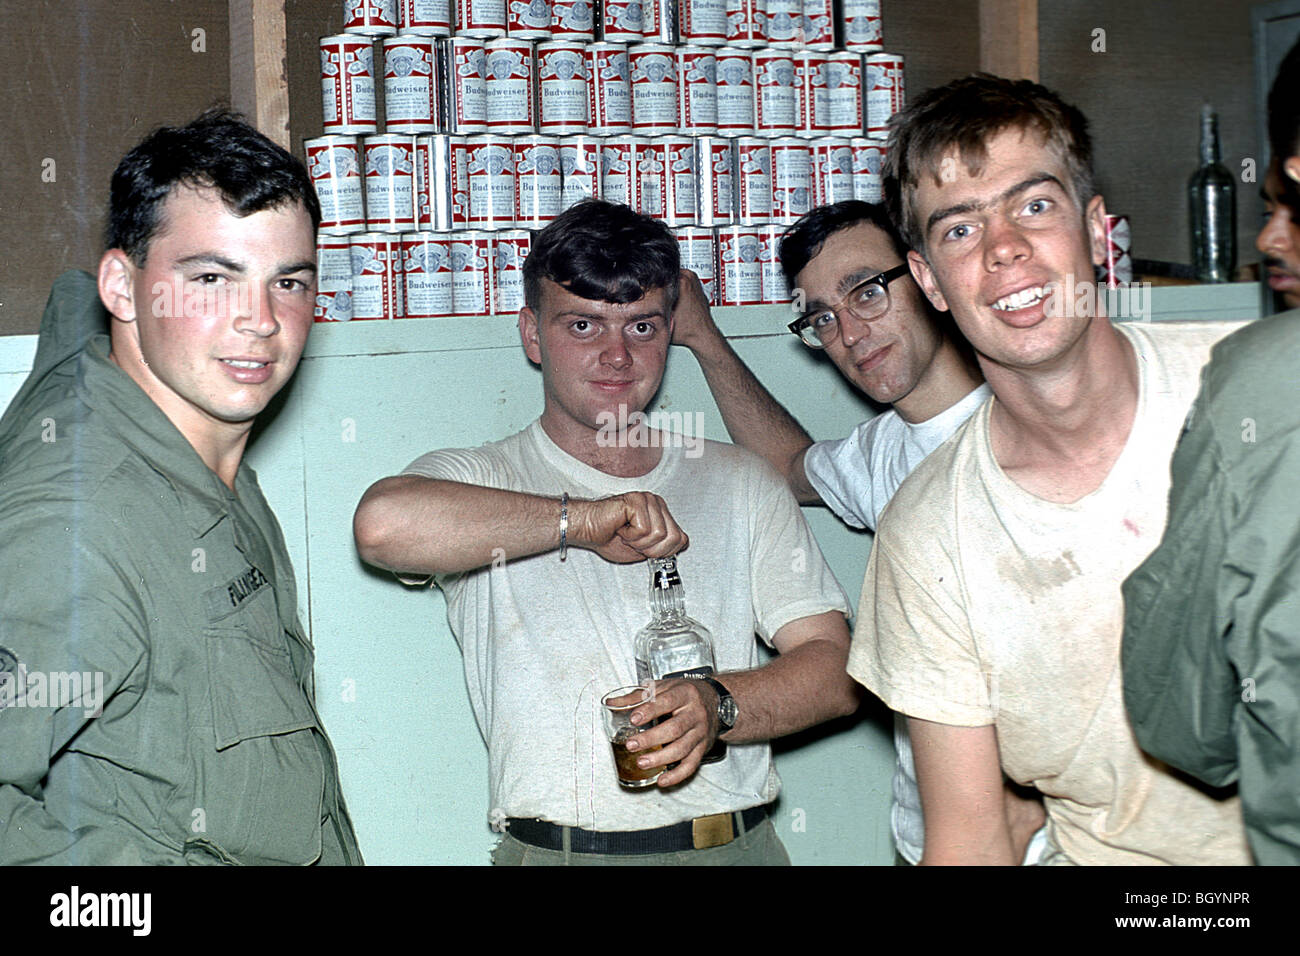 Teenagers and twenties GIs getting drunk with stack of budweiser beers cans. 4th Infantry Division Ivy in Pleiku Province 1968. Stock Photo